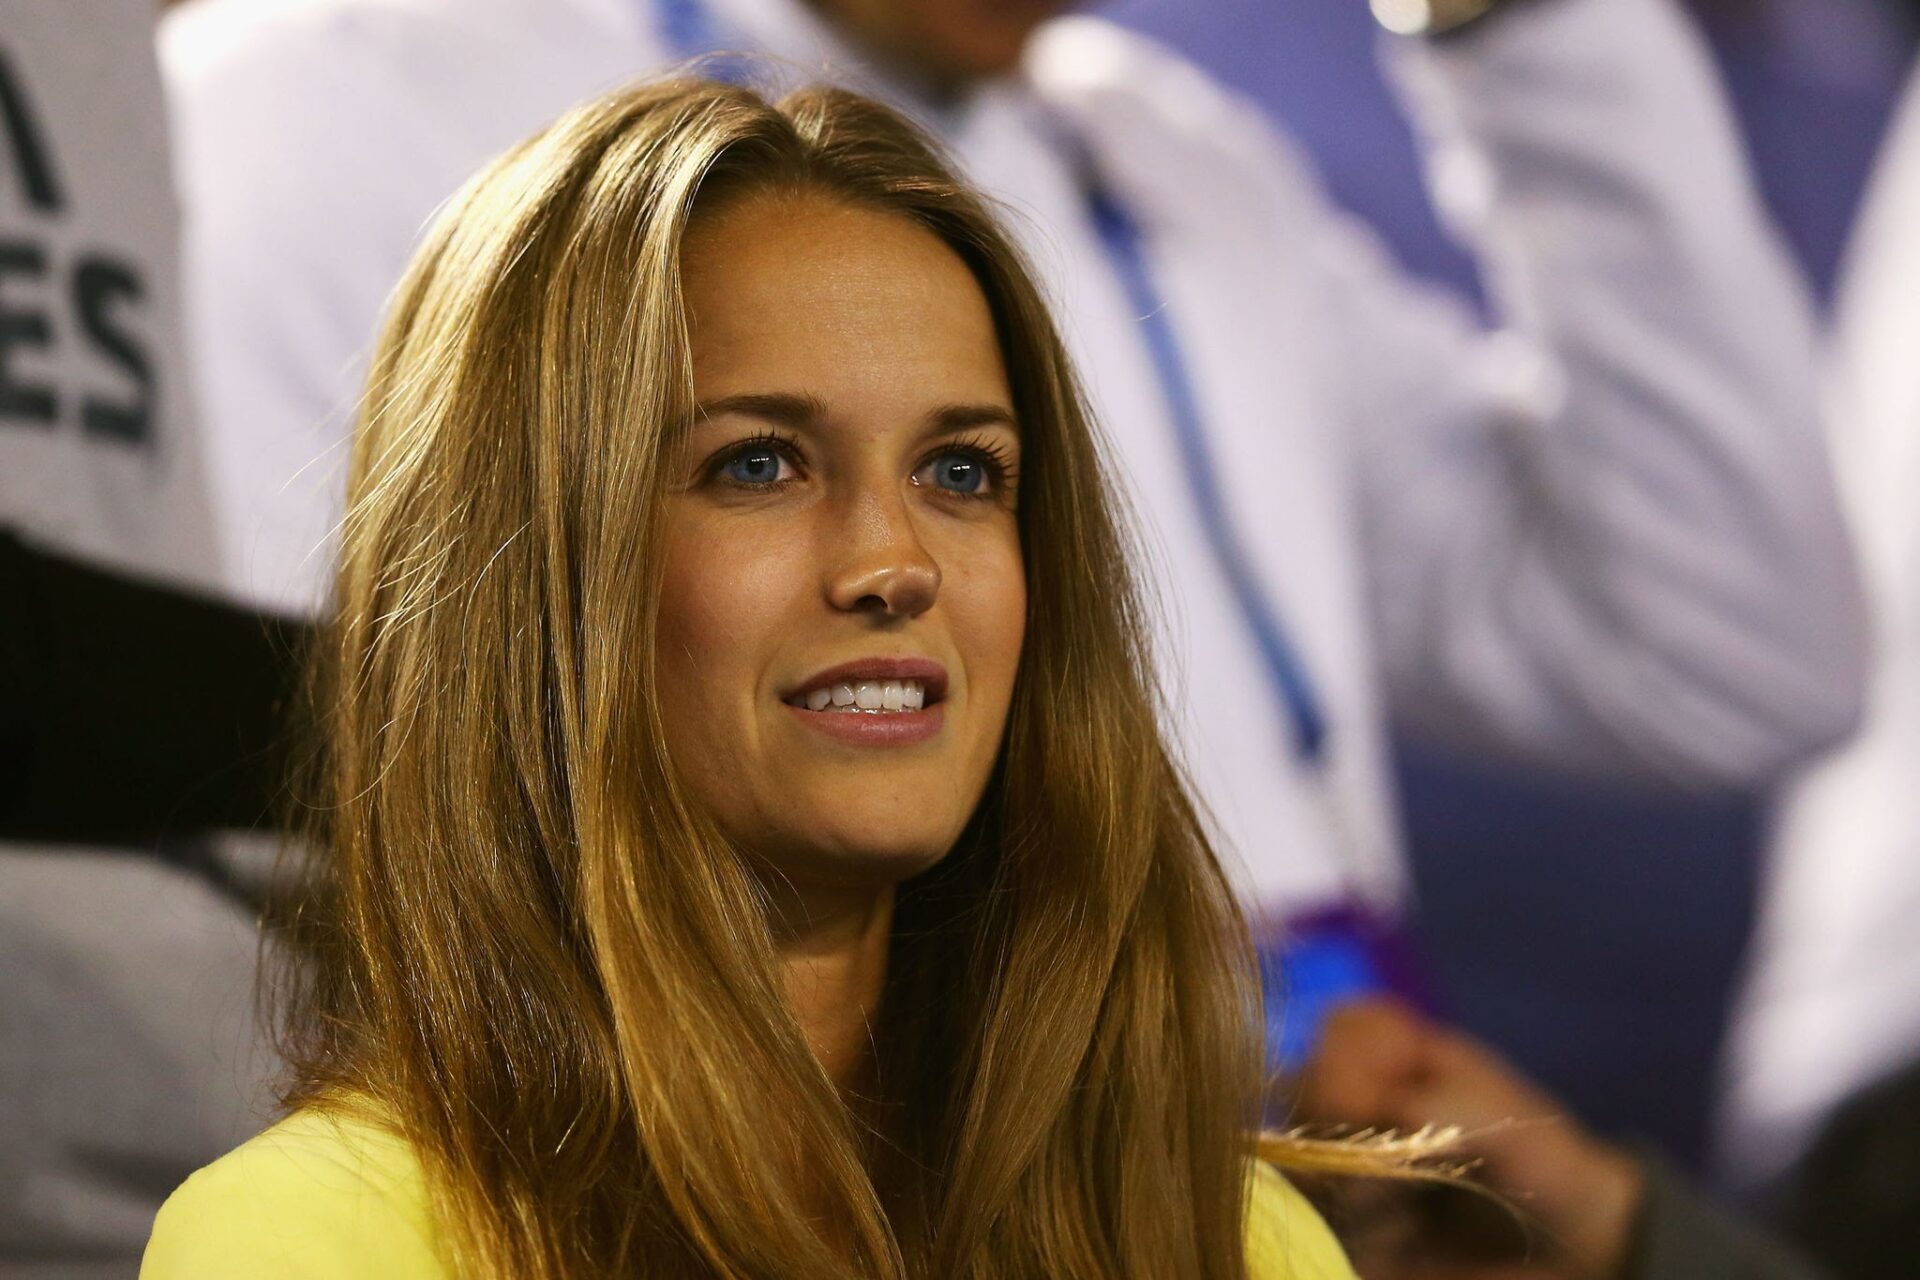 Andy Murray's Wife Kim Sears Biography: Age, Net Worth, Instagram, Spouse, Height, Wiki, Parents, Siblings